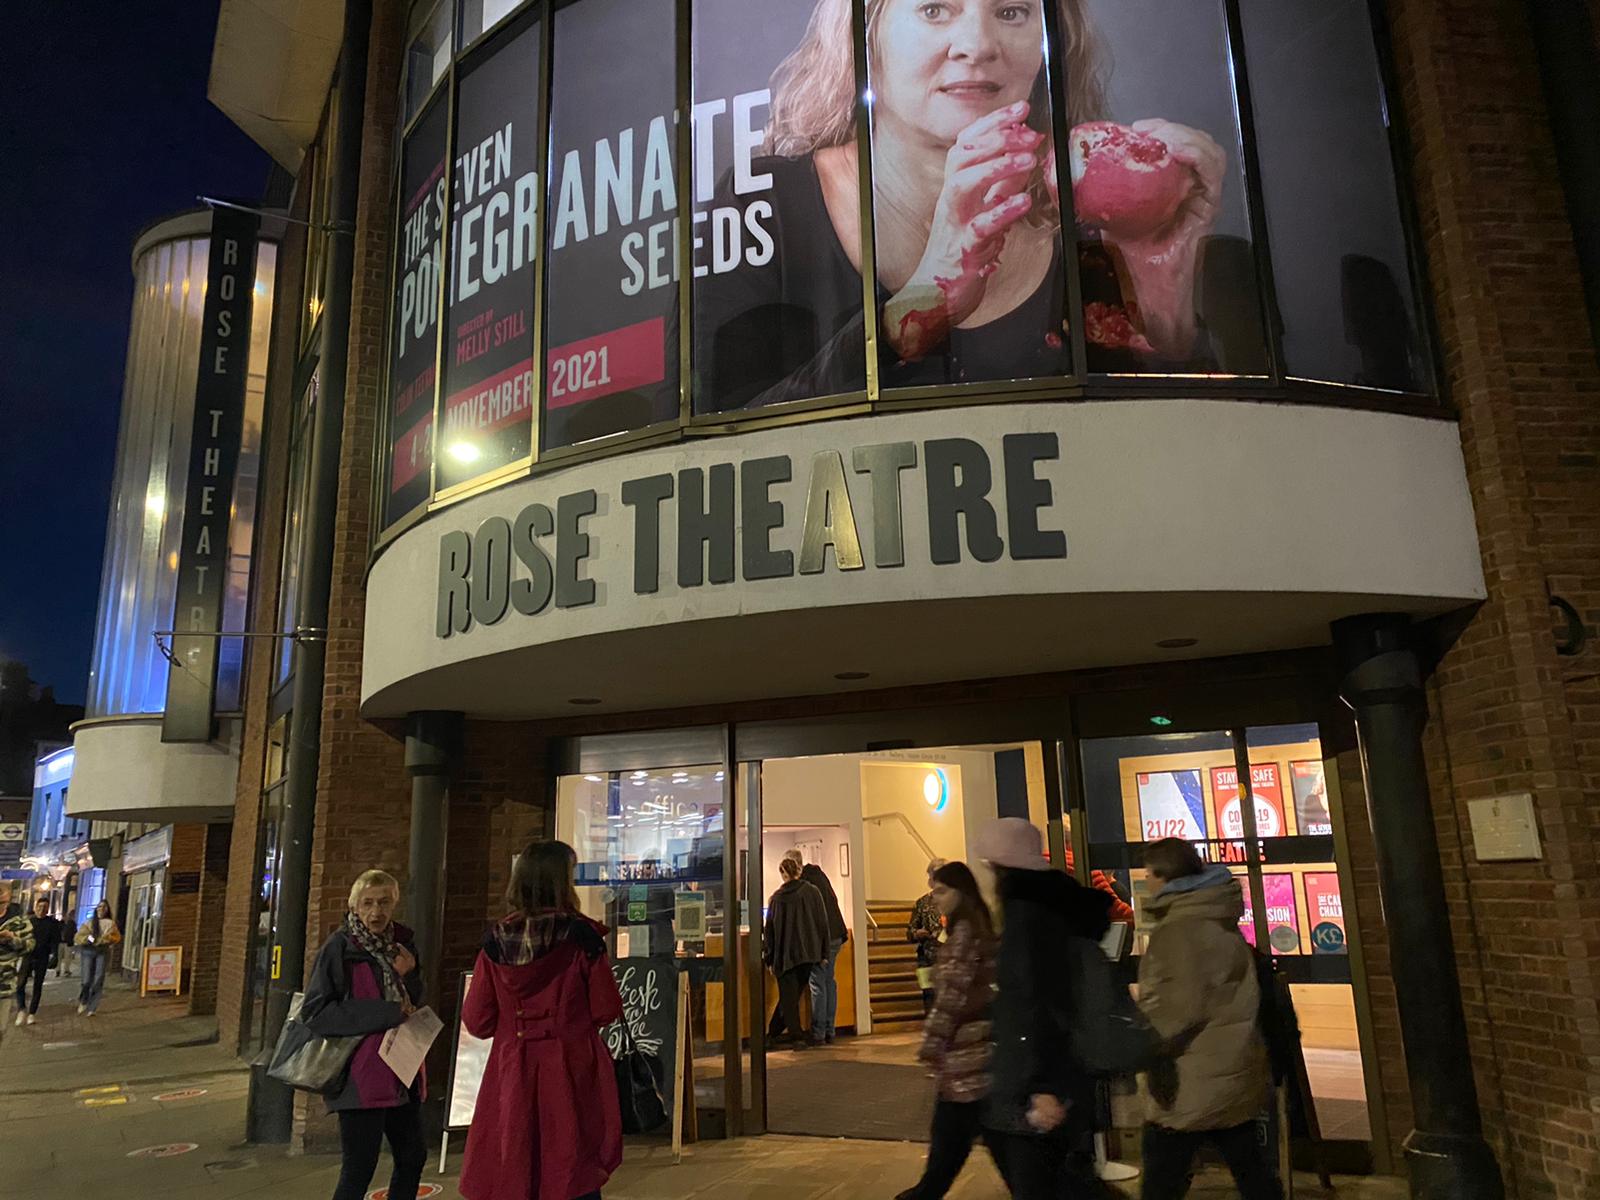 Night life outside Rose theatre